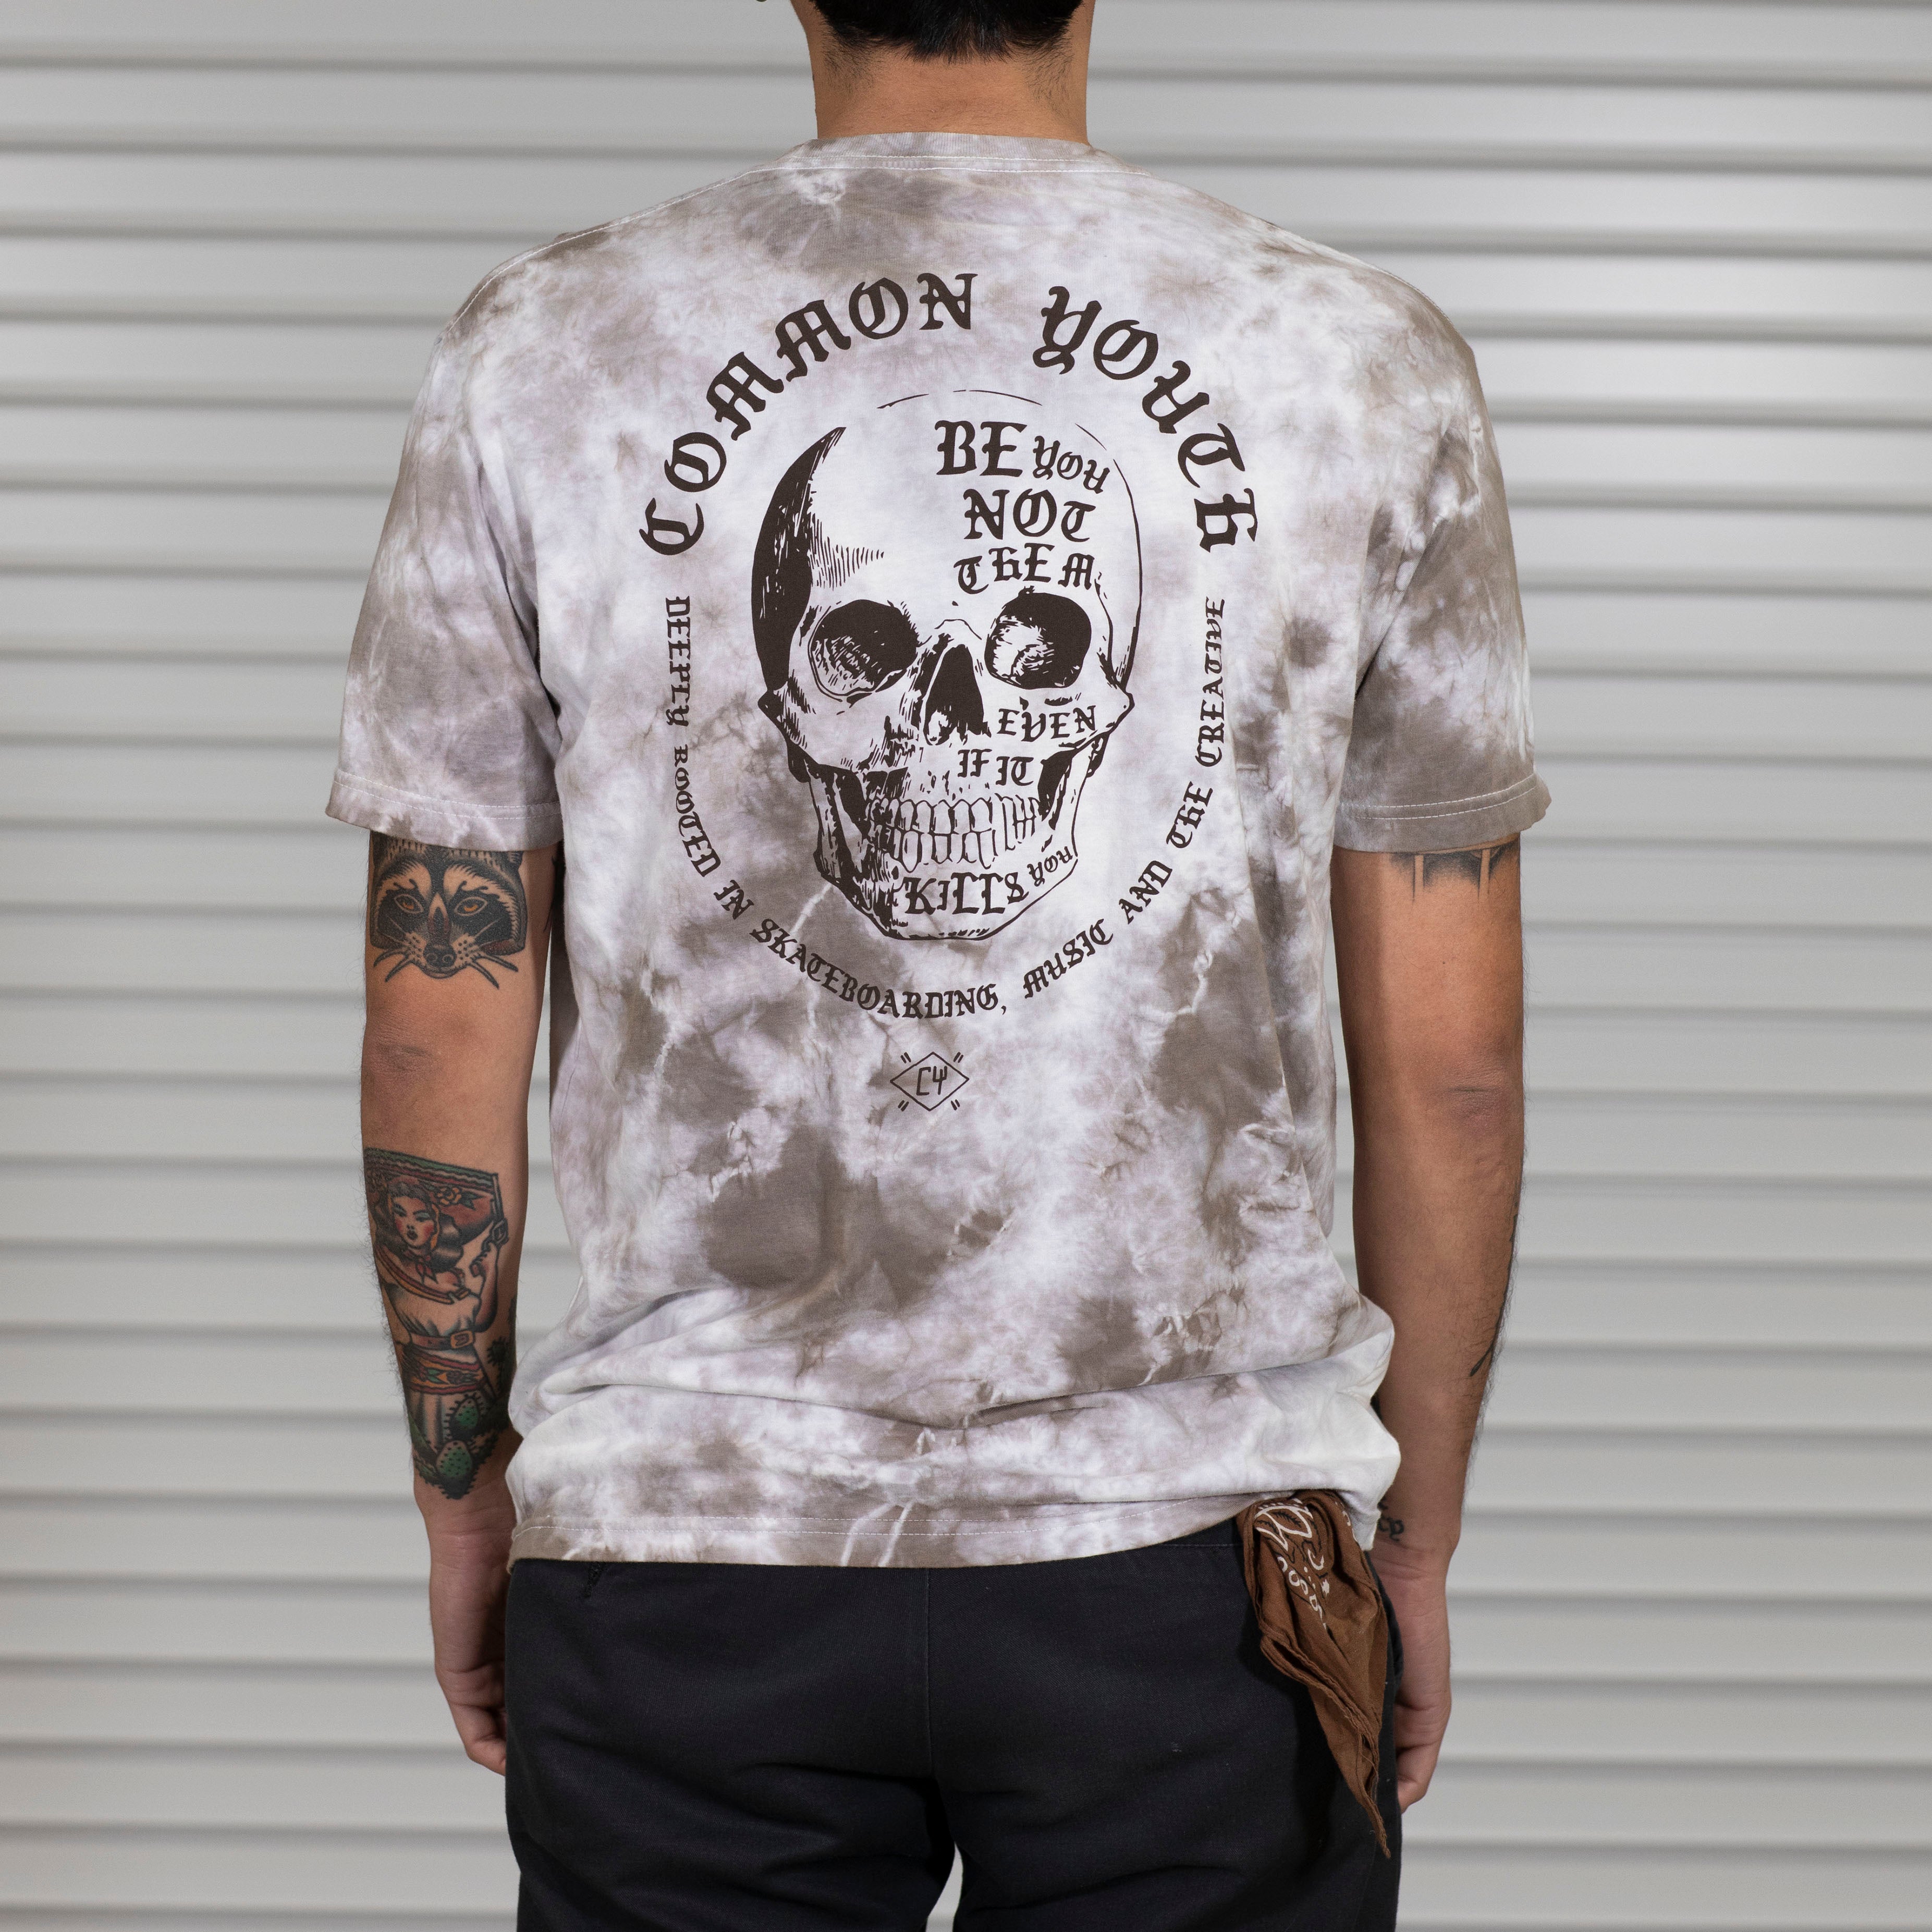 TO THE BONE SS - commonyouthbrand